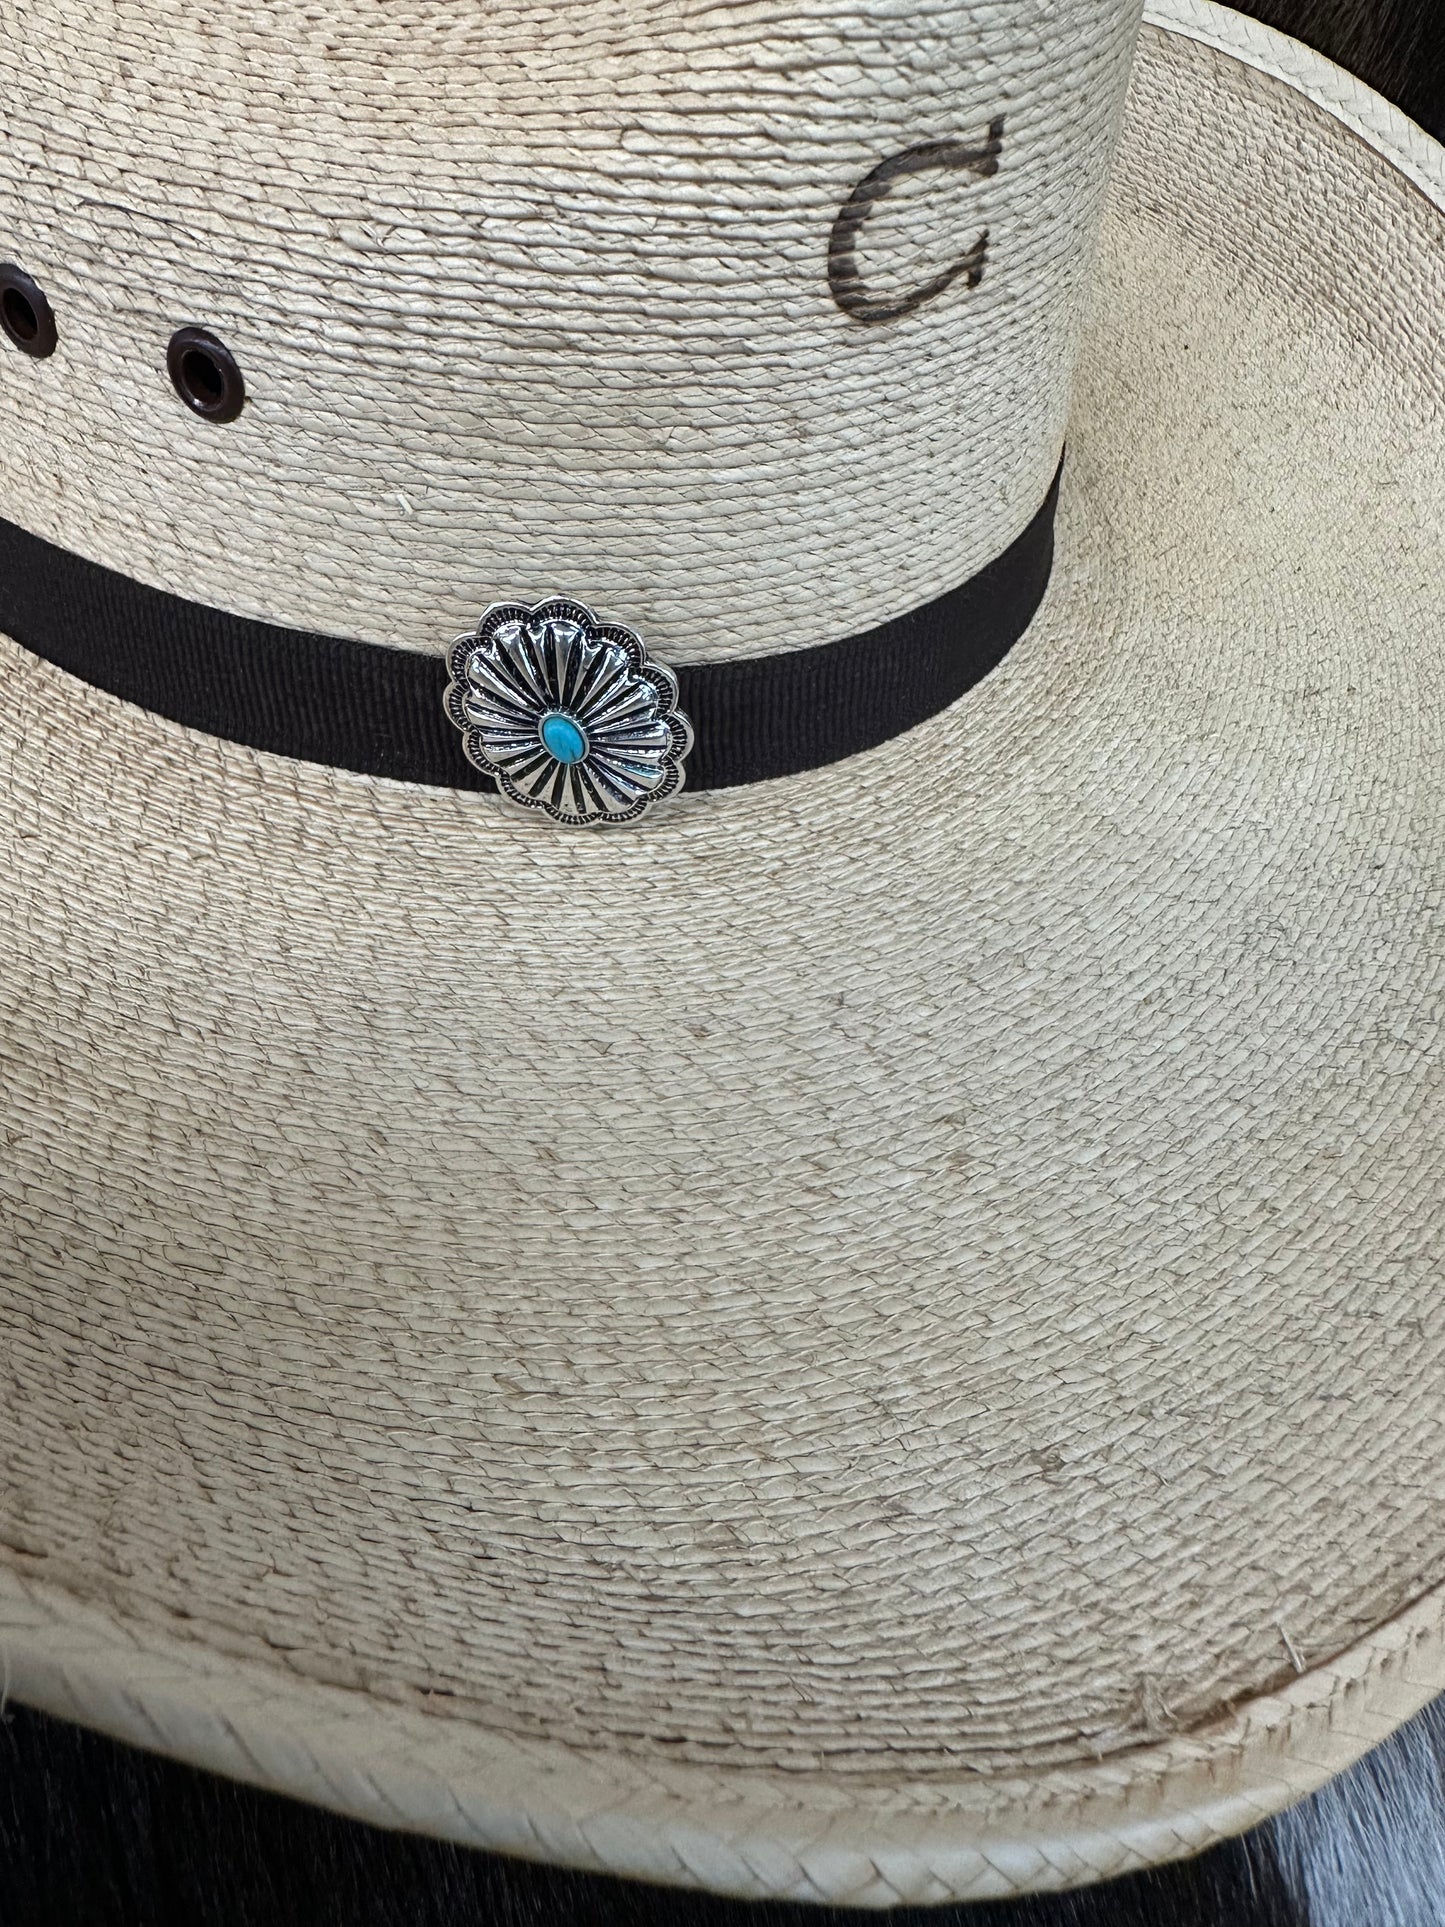 The Annie Oakley Hat Pin